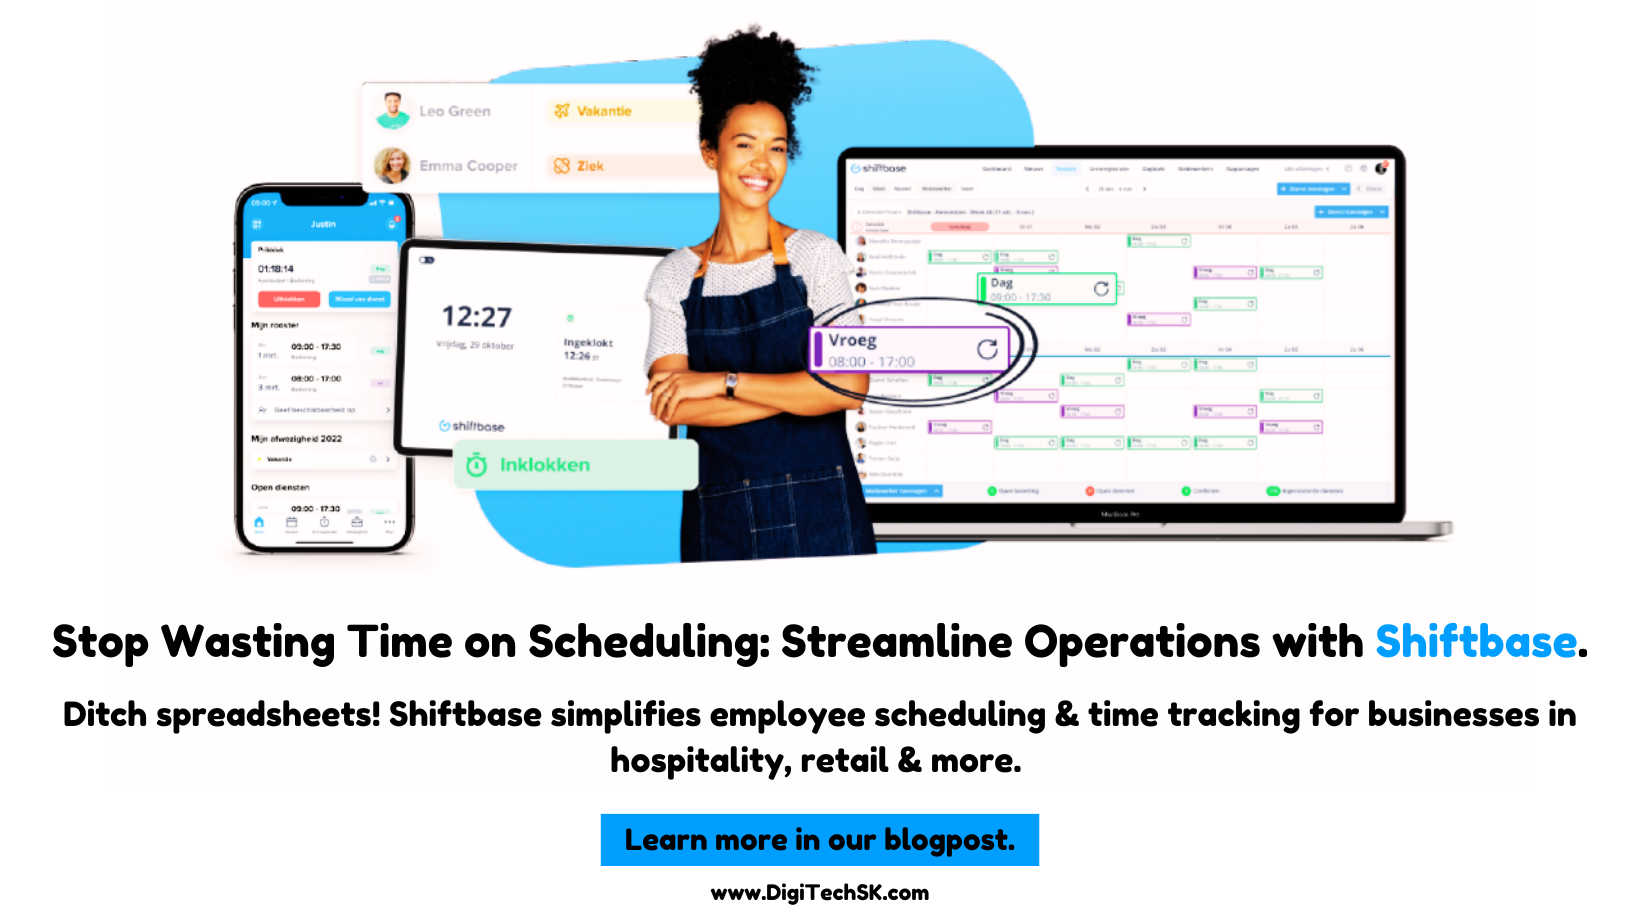 Stop Wasting Time on Scheduling: Streamline Operations with Shiftbase.